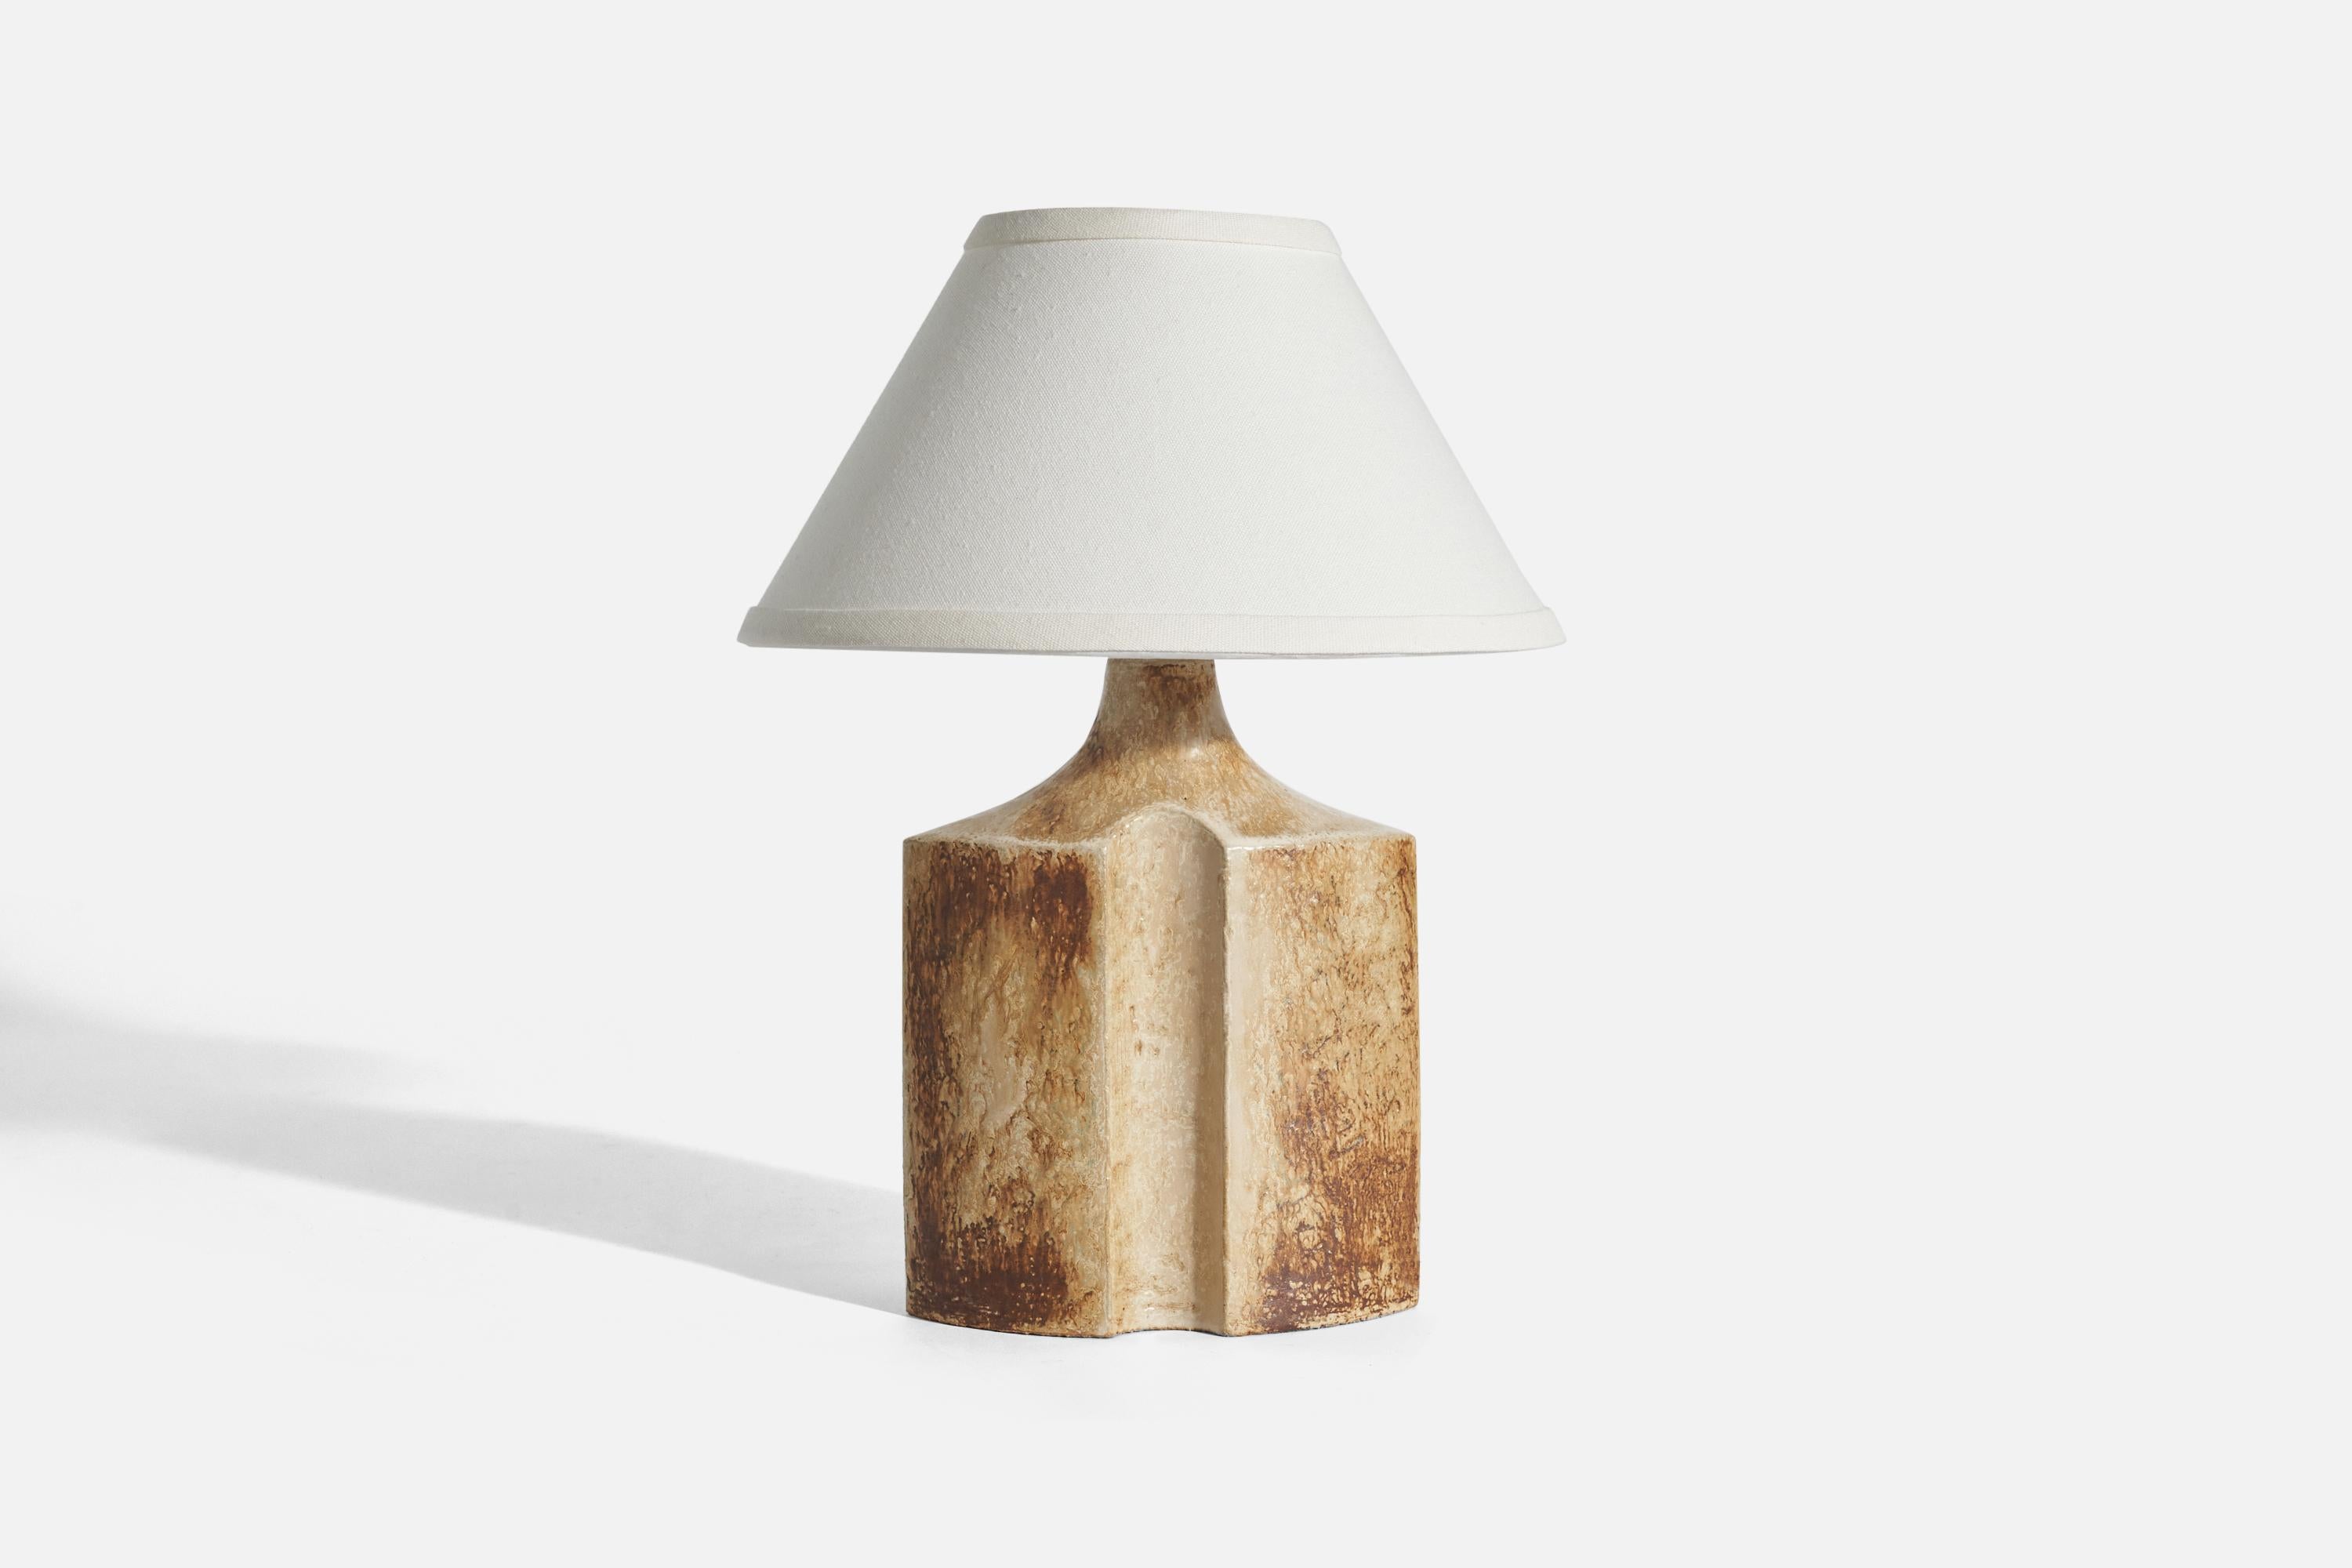 A beige, glazed stoneware table lamp, model 1219-1, designed by Haico Nitzsche and produced by Søholm Stentøj, Denmark, 1970s.

Sold without lampshade(s)
Dimensions of lamp (inches) : 10.81 x 6.37 x 3.37 (Height x Width x Depth)
Dimensions of